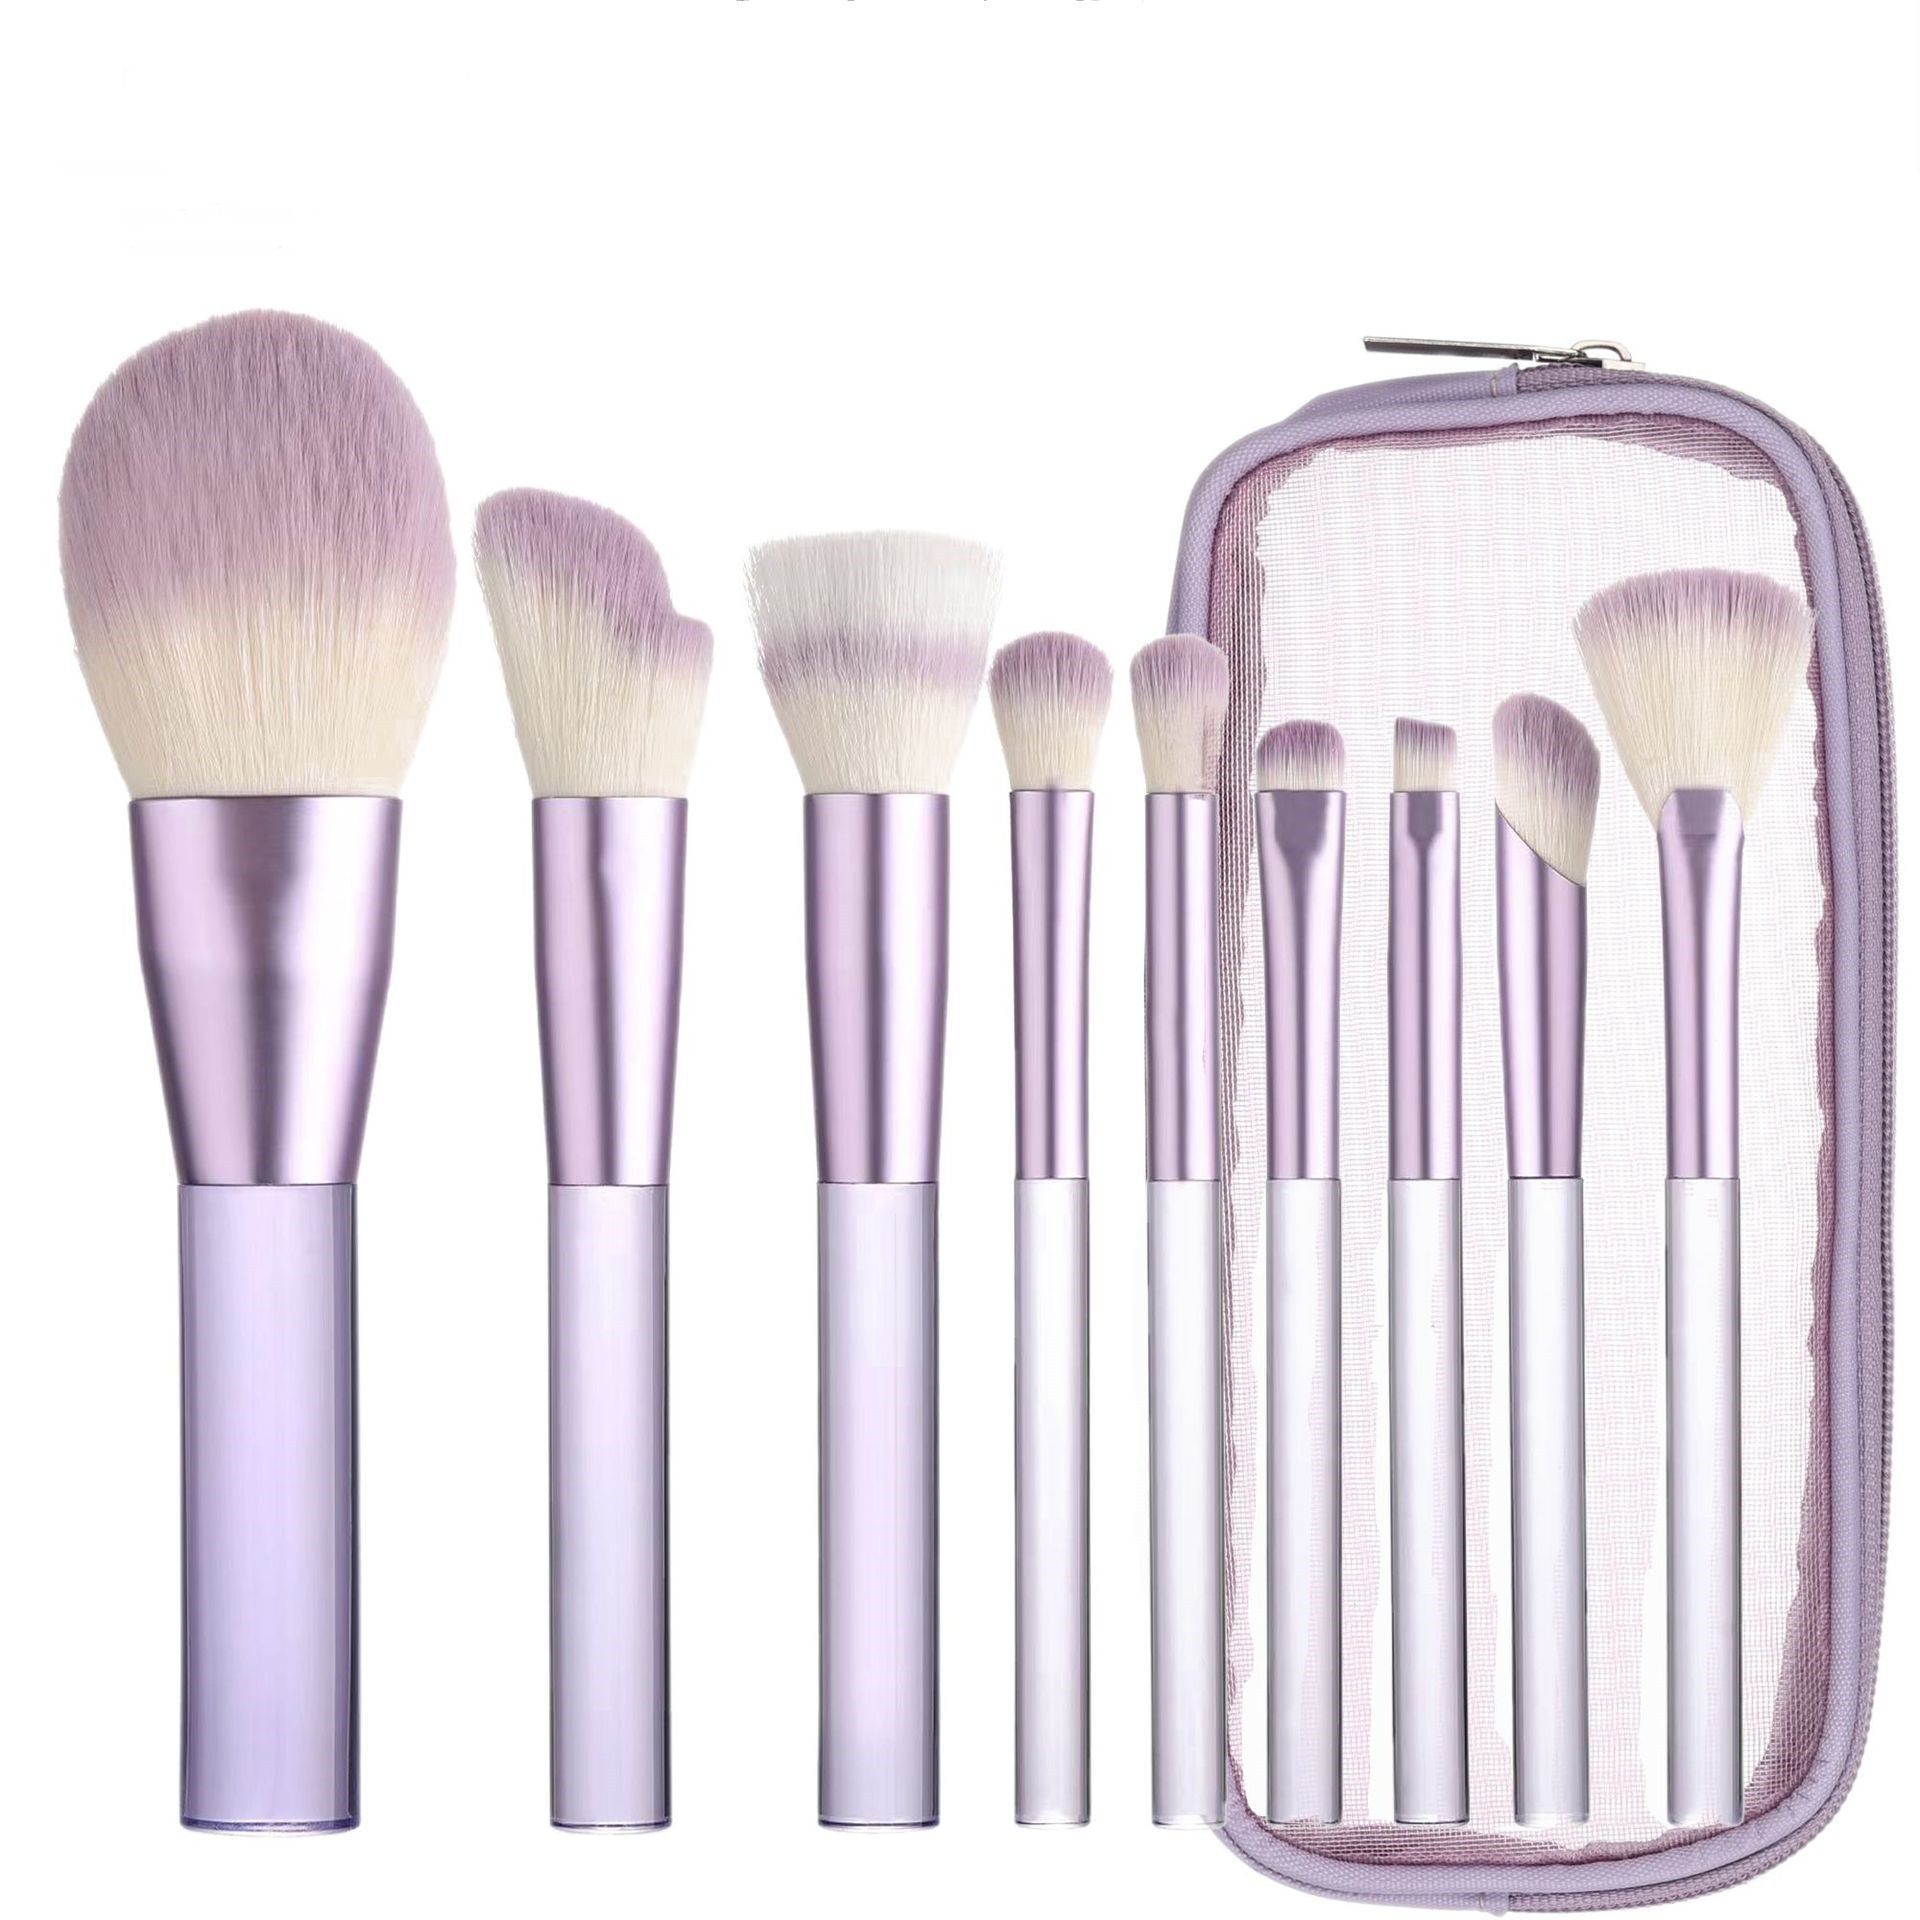 New Arrival Portable Makeup Brush Set 9Pcs Plastic Handle Beauty Tools with Cosmetic Case